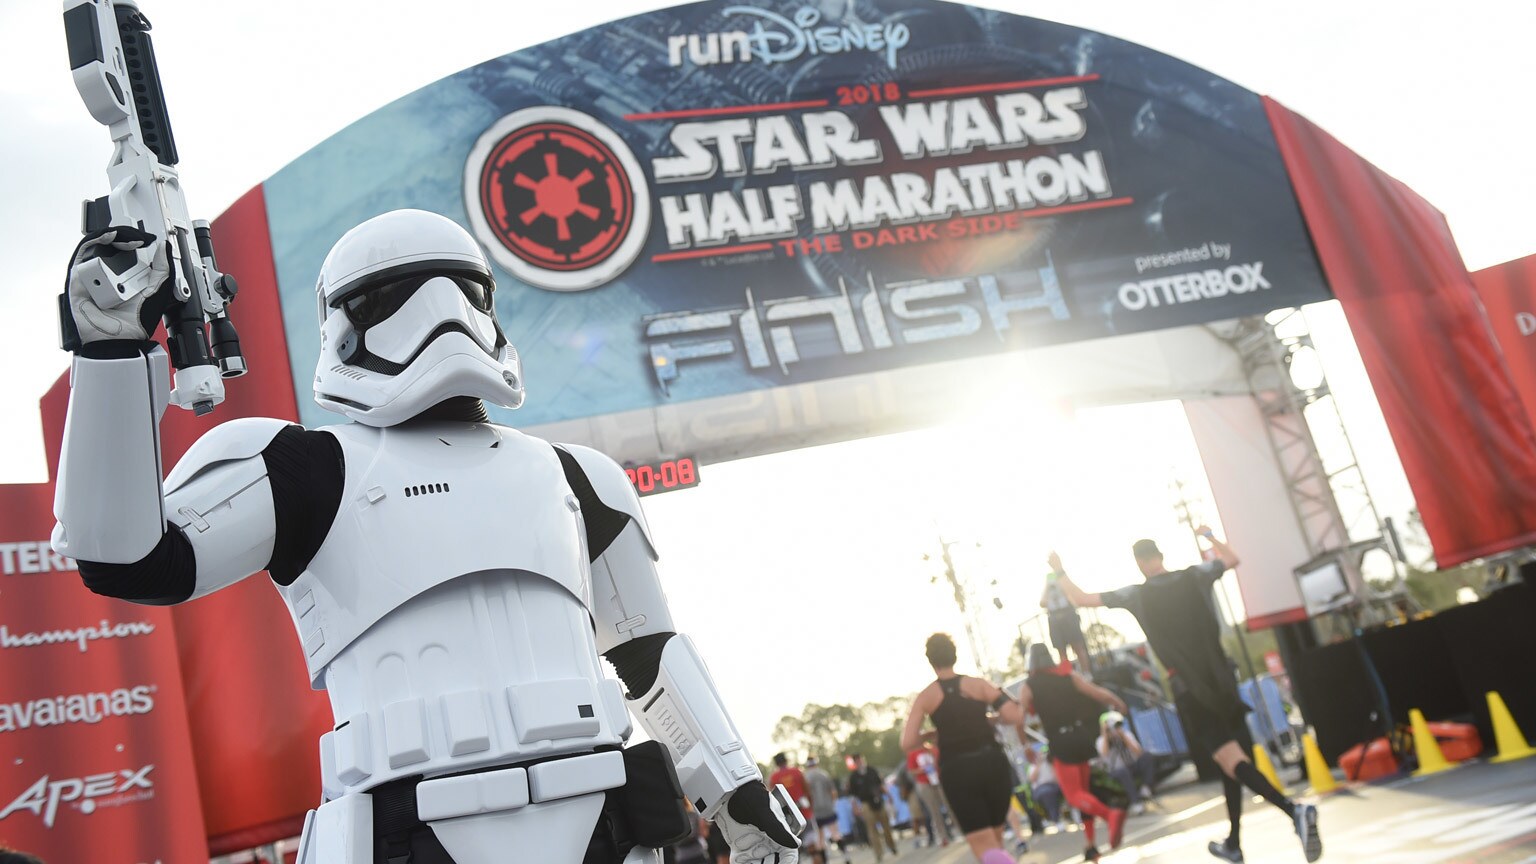 7 Things to Remember for a Successful runDisney Star Wars Rival Run Weekend